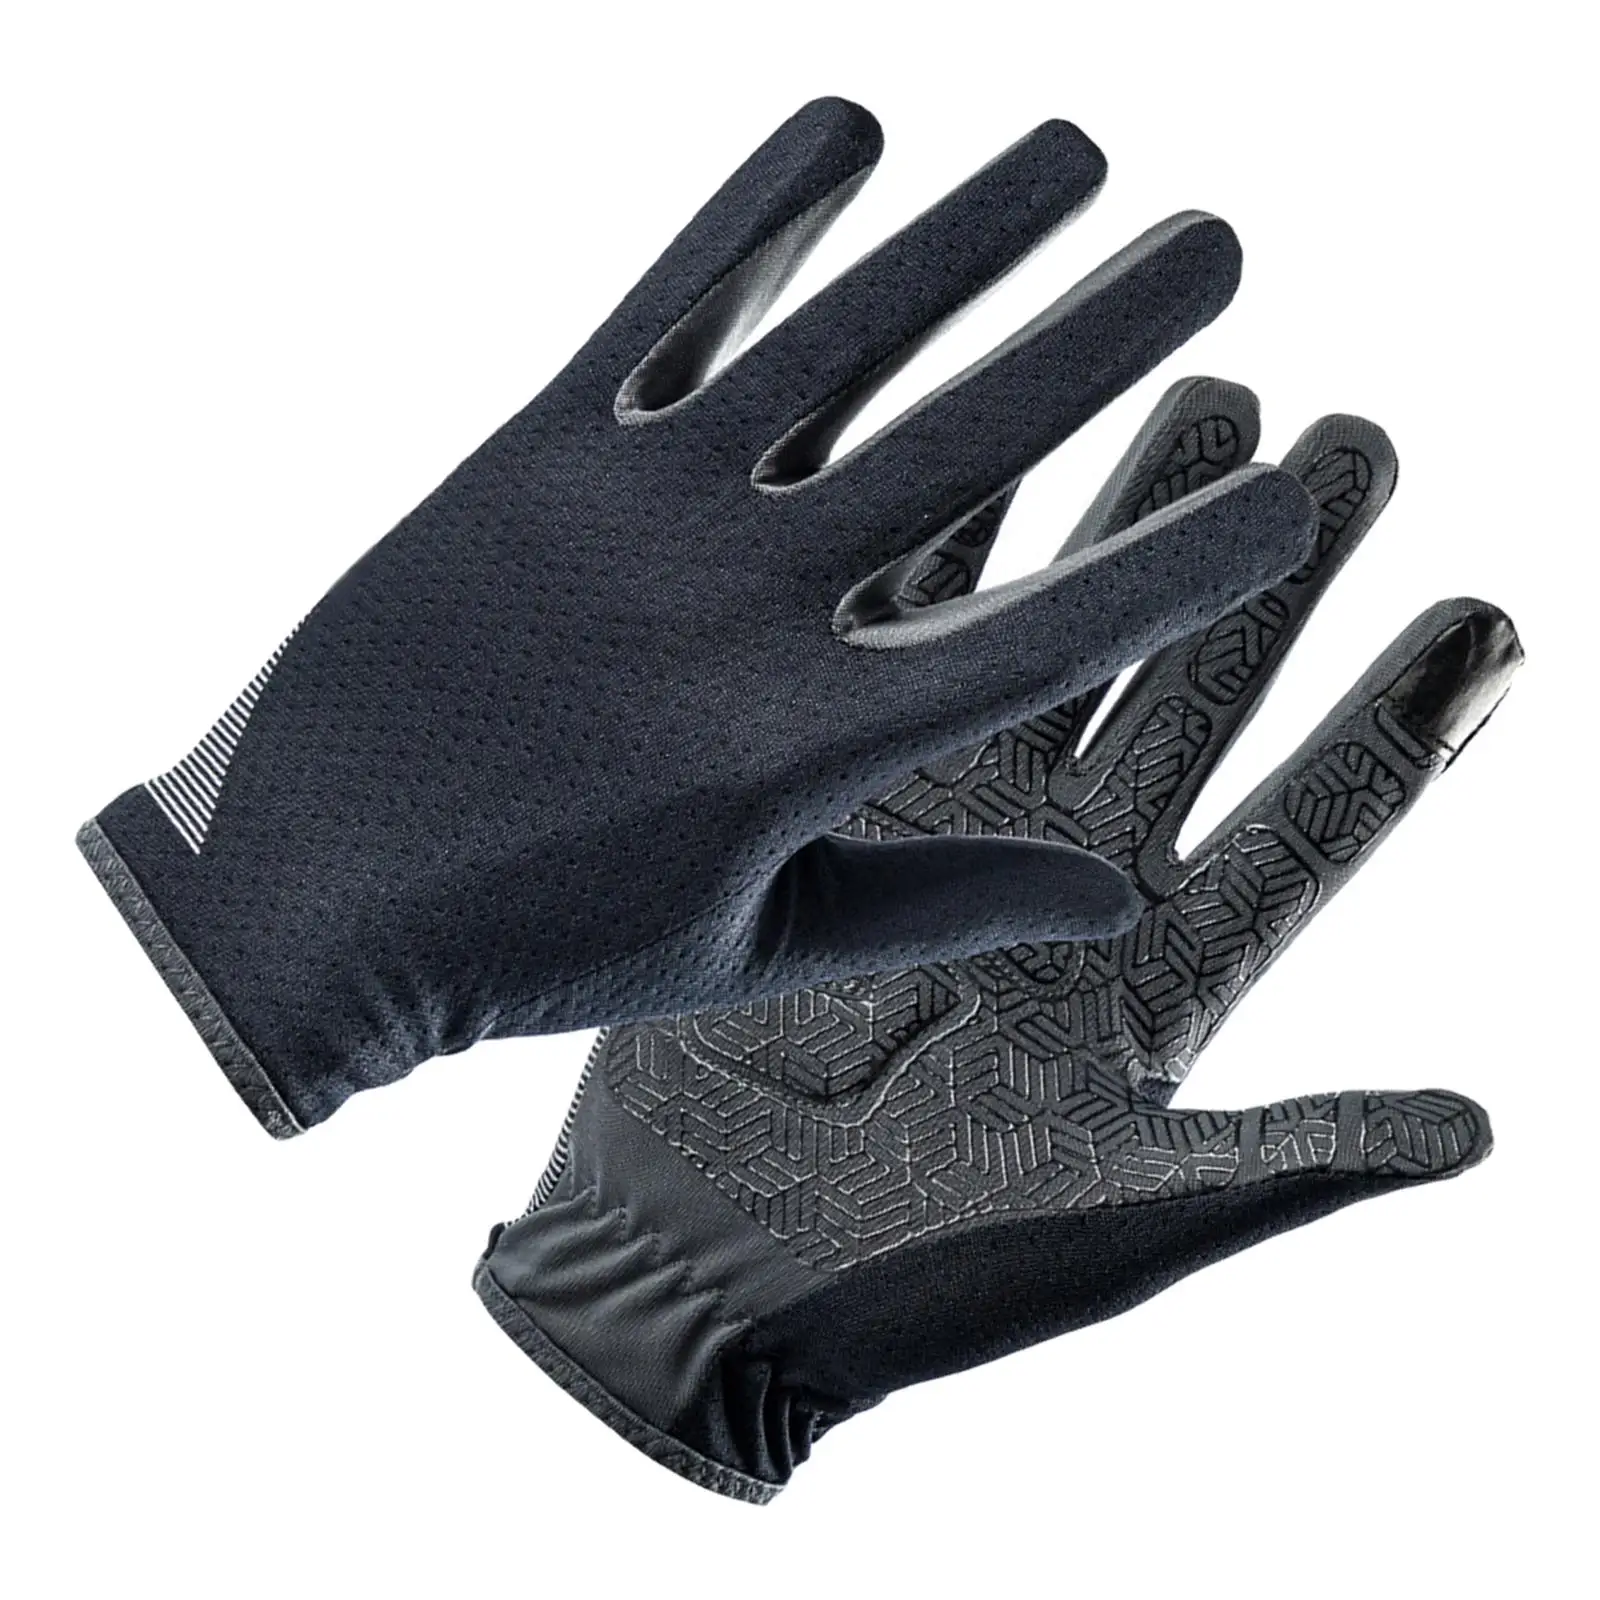 Cycling Gloves Anti Slip Spring Summer Breathable for Bike Riding Riding